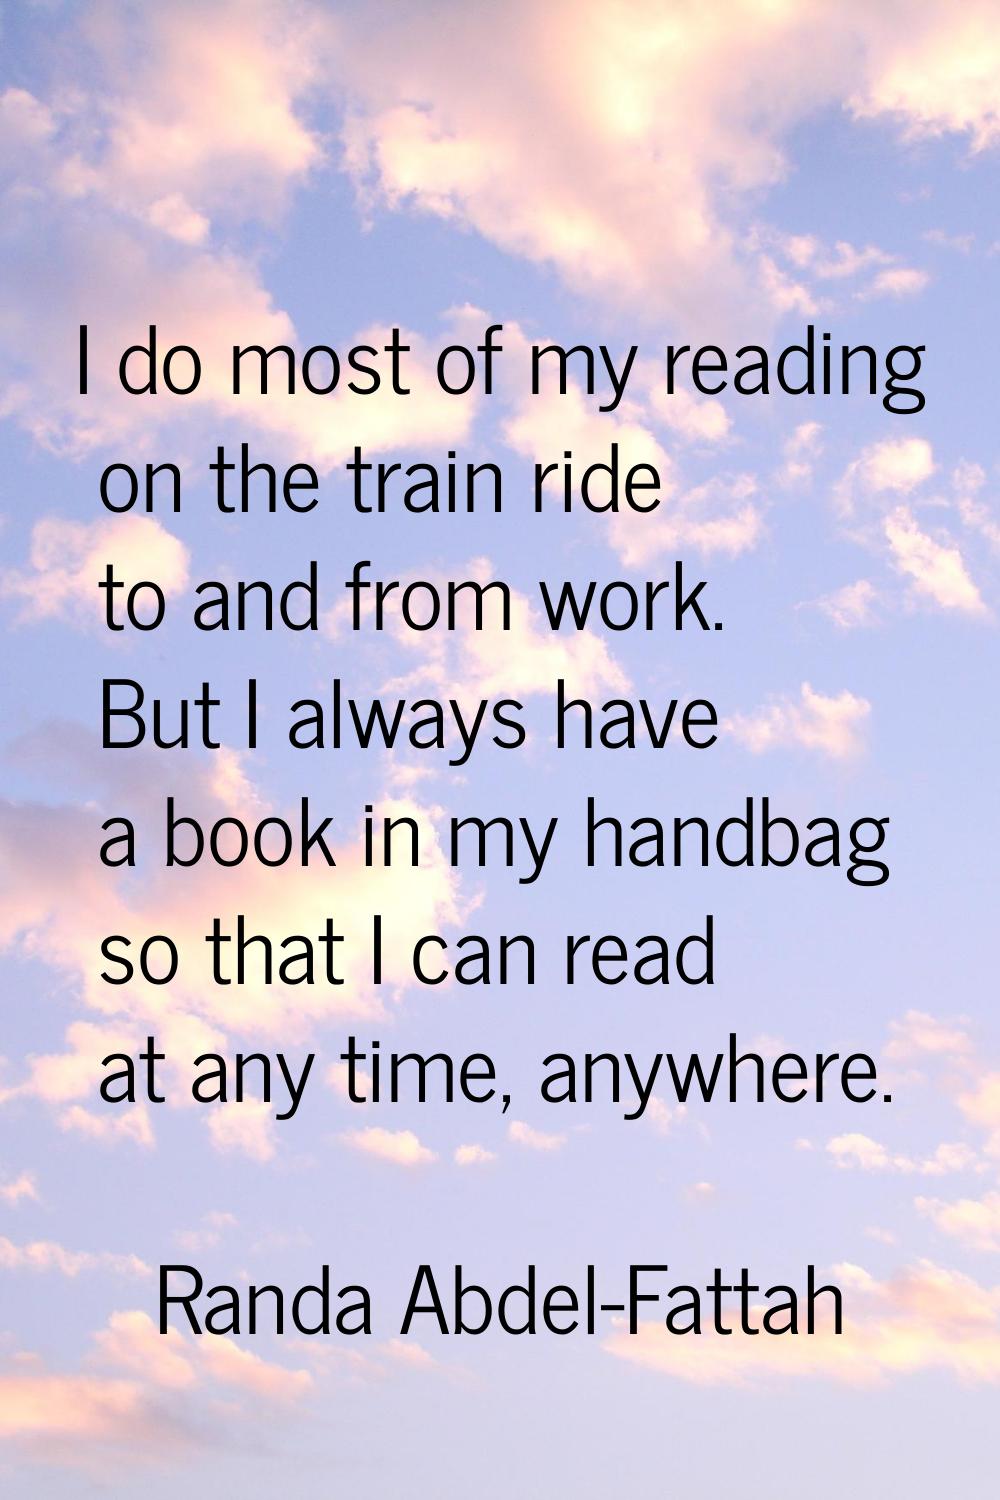 I do most of my reading on the train ride to and from work. But I always have a book in my handbag 